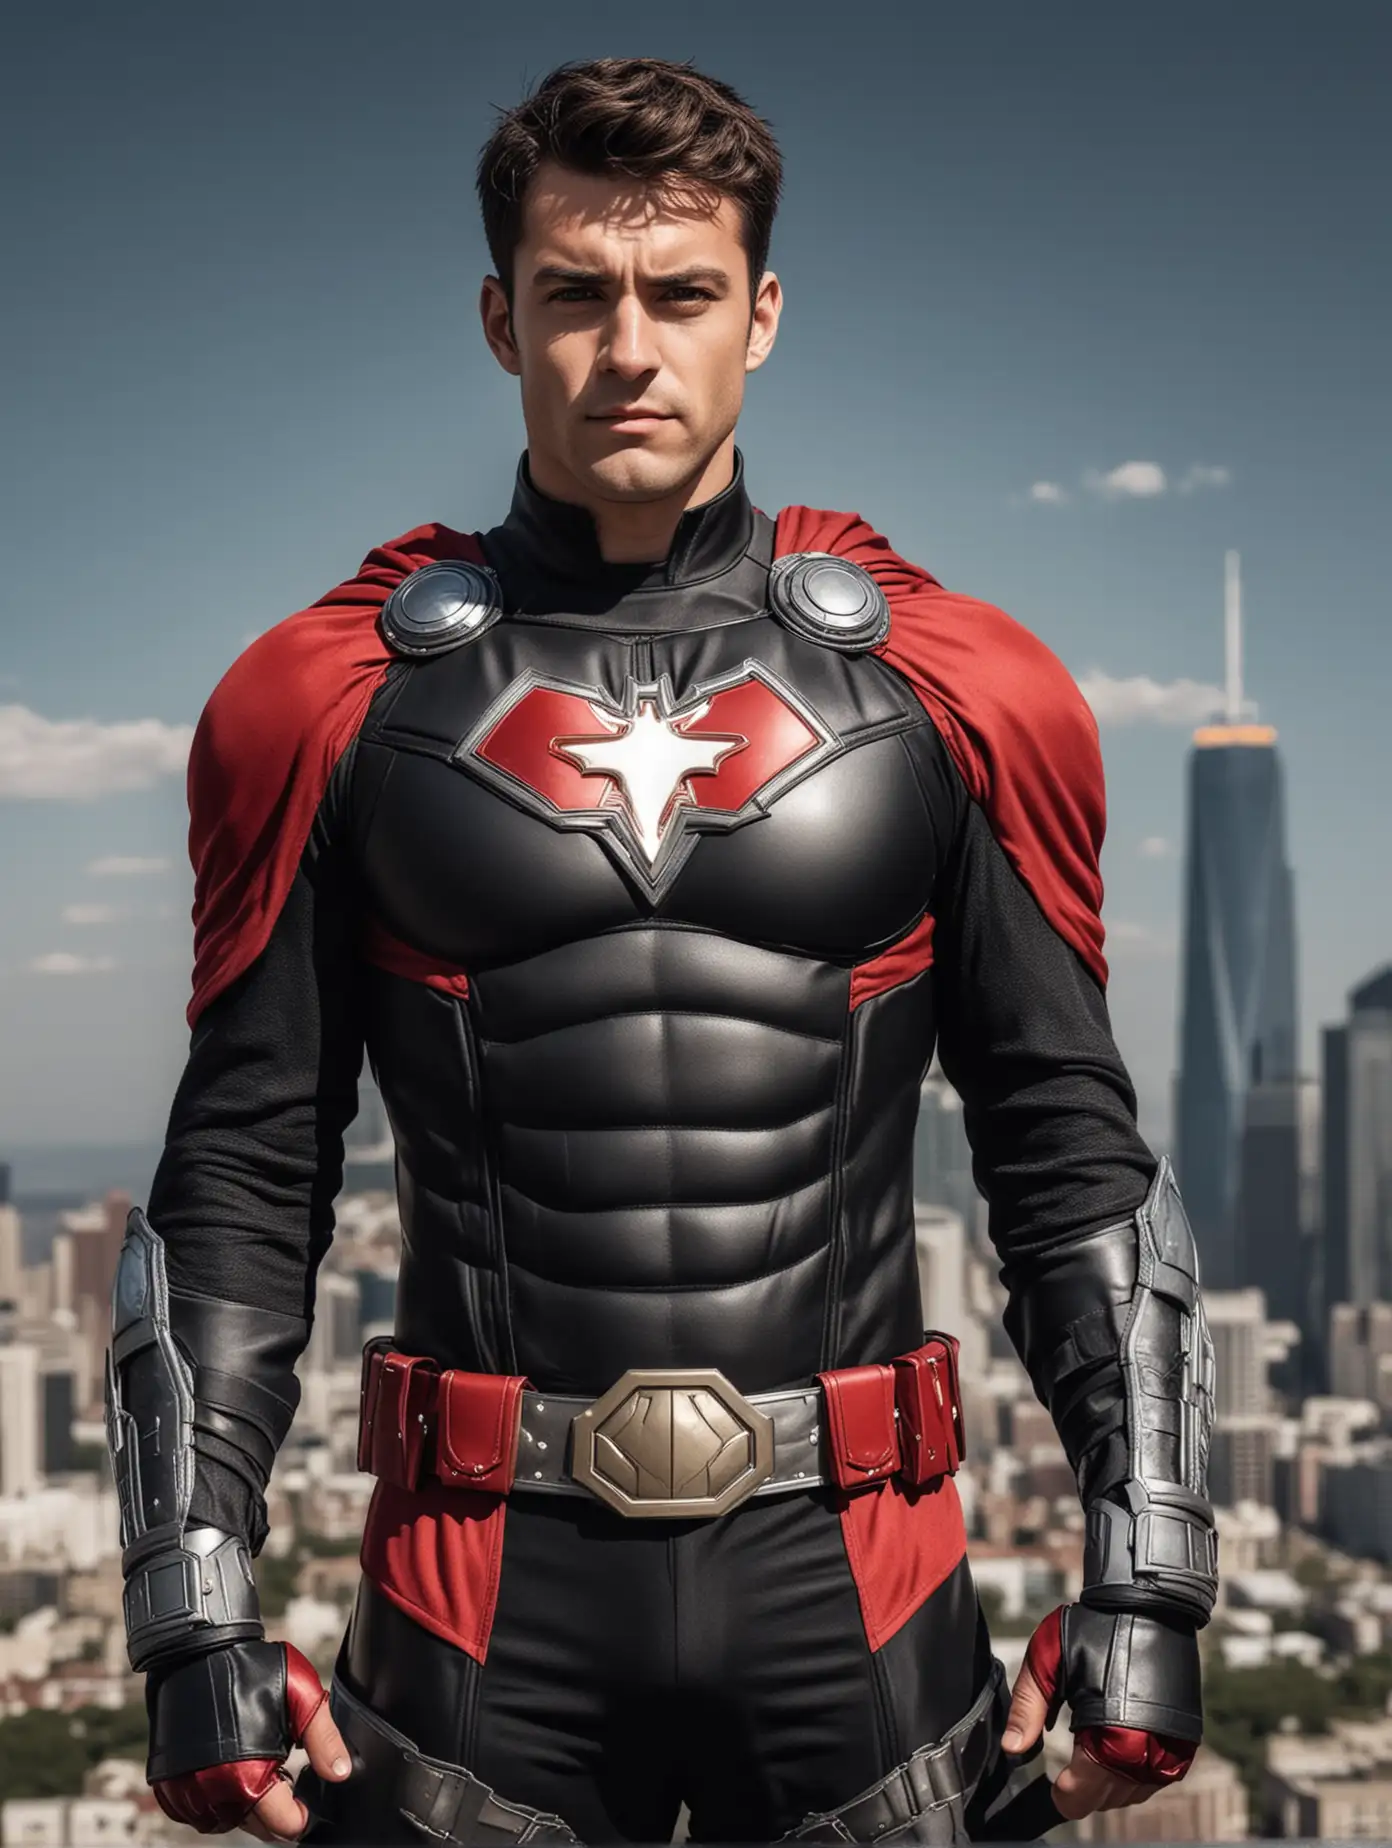 Confident Superhero in Black Red and Blue Costume against City Skyline